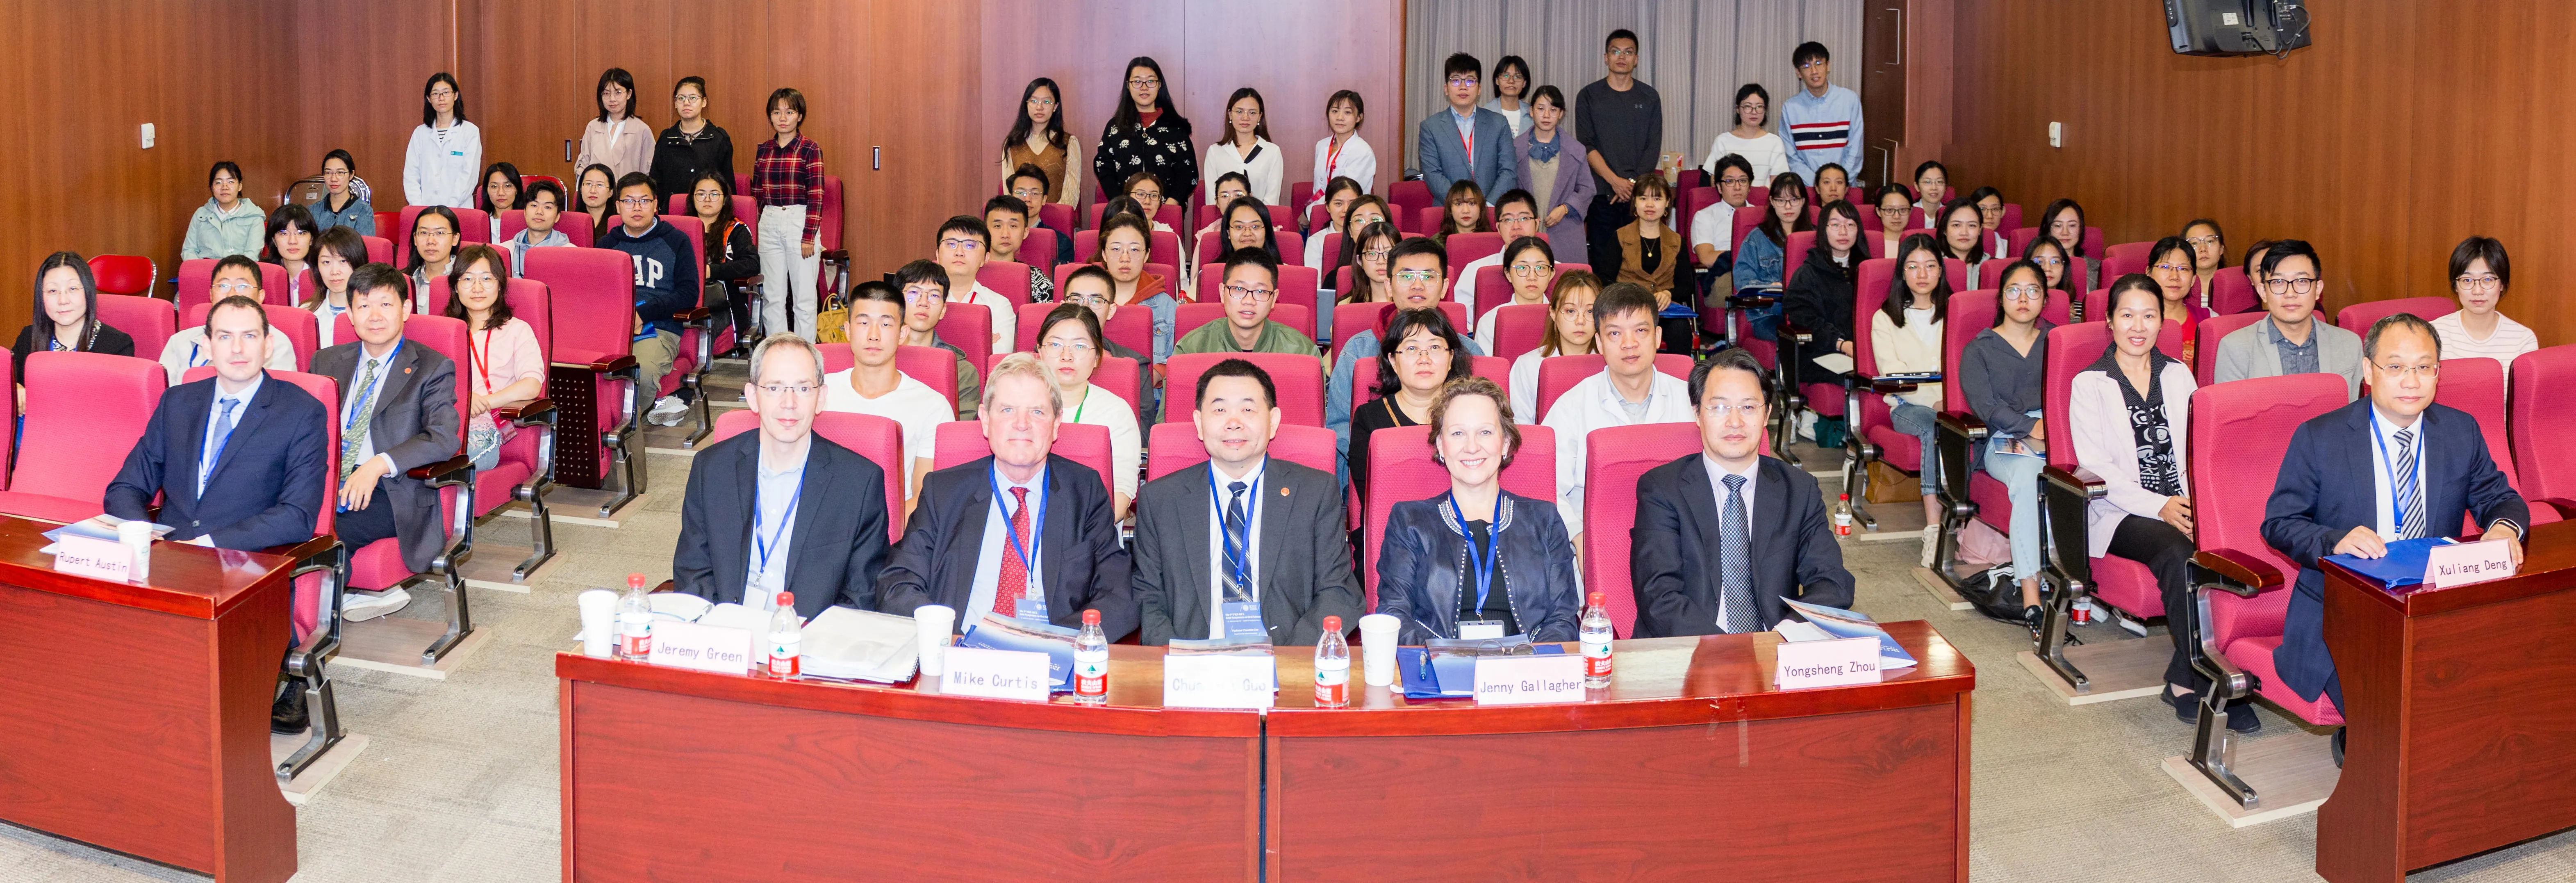 Joint Symposium on oral science